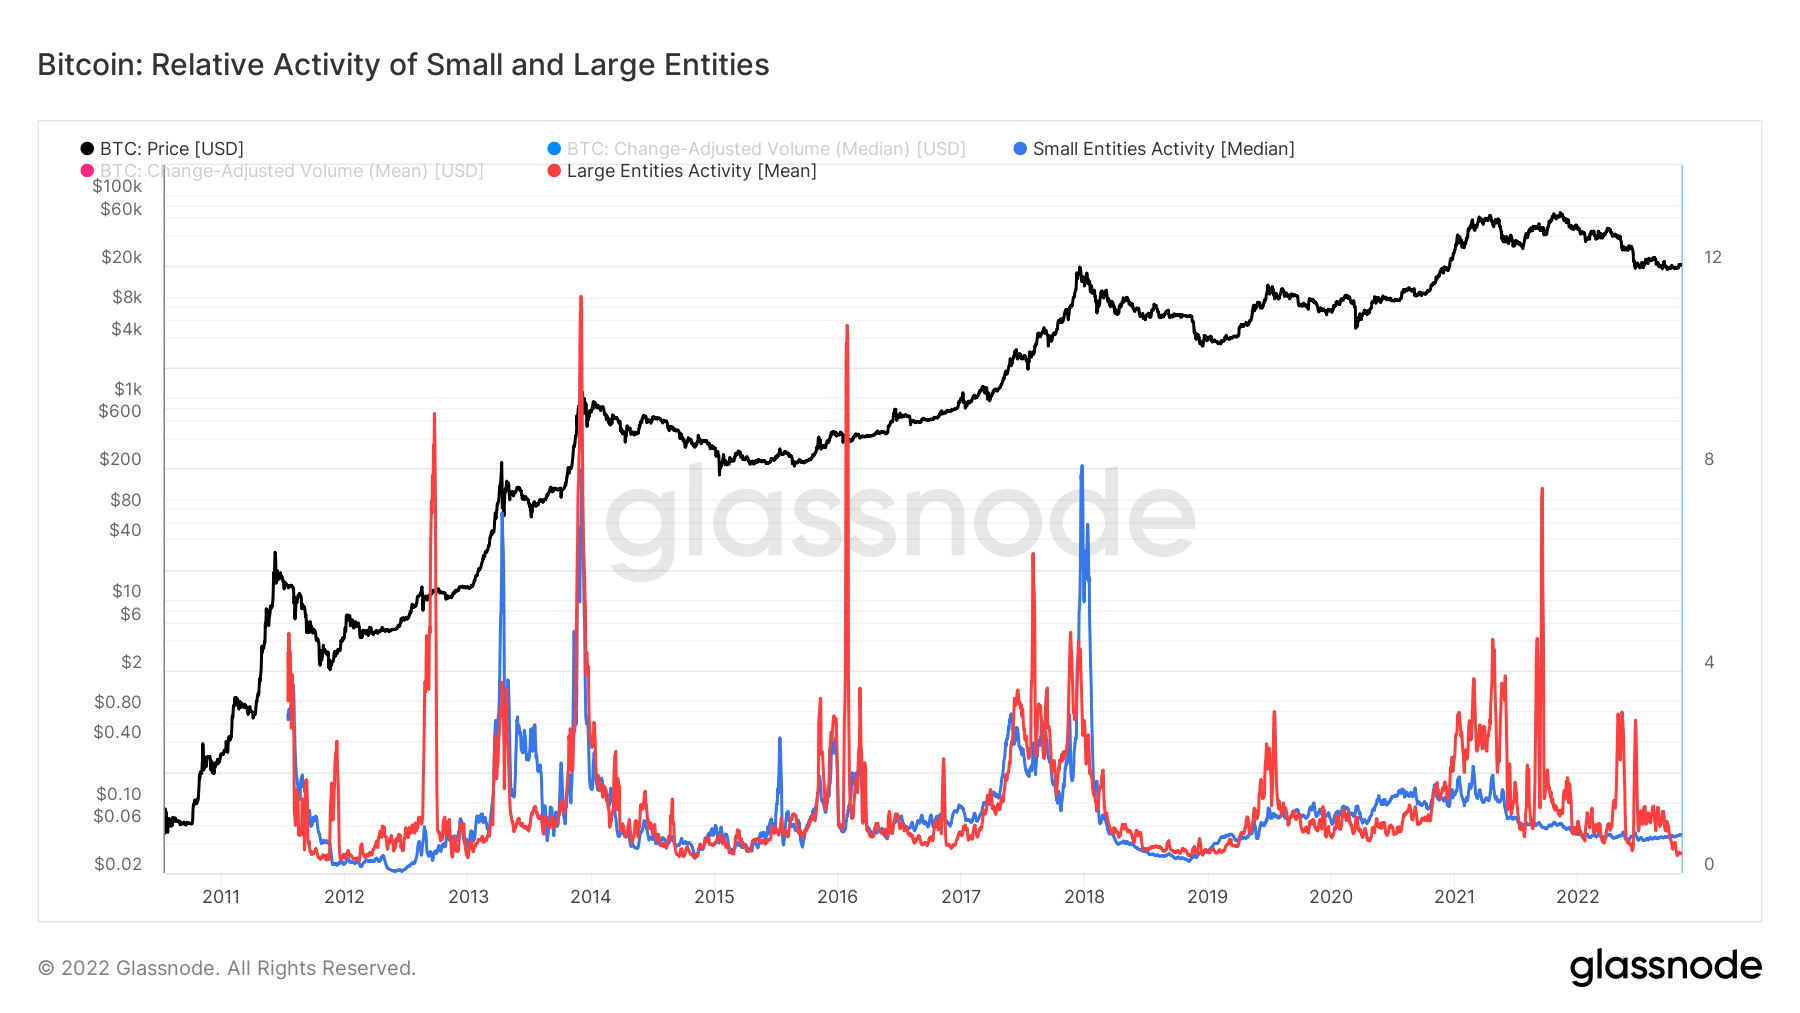 The activity of small and large entities Bitcoin